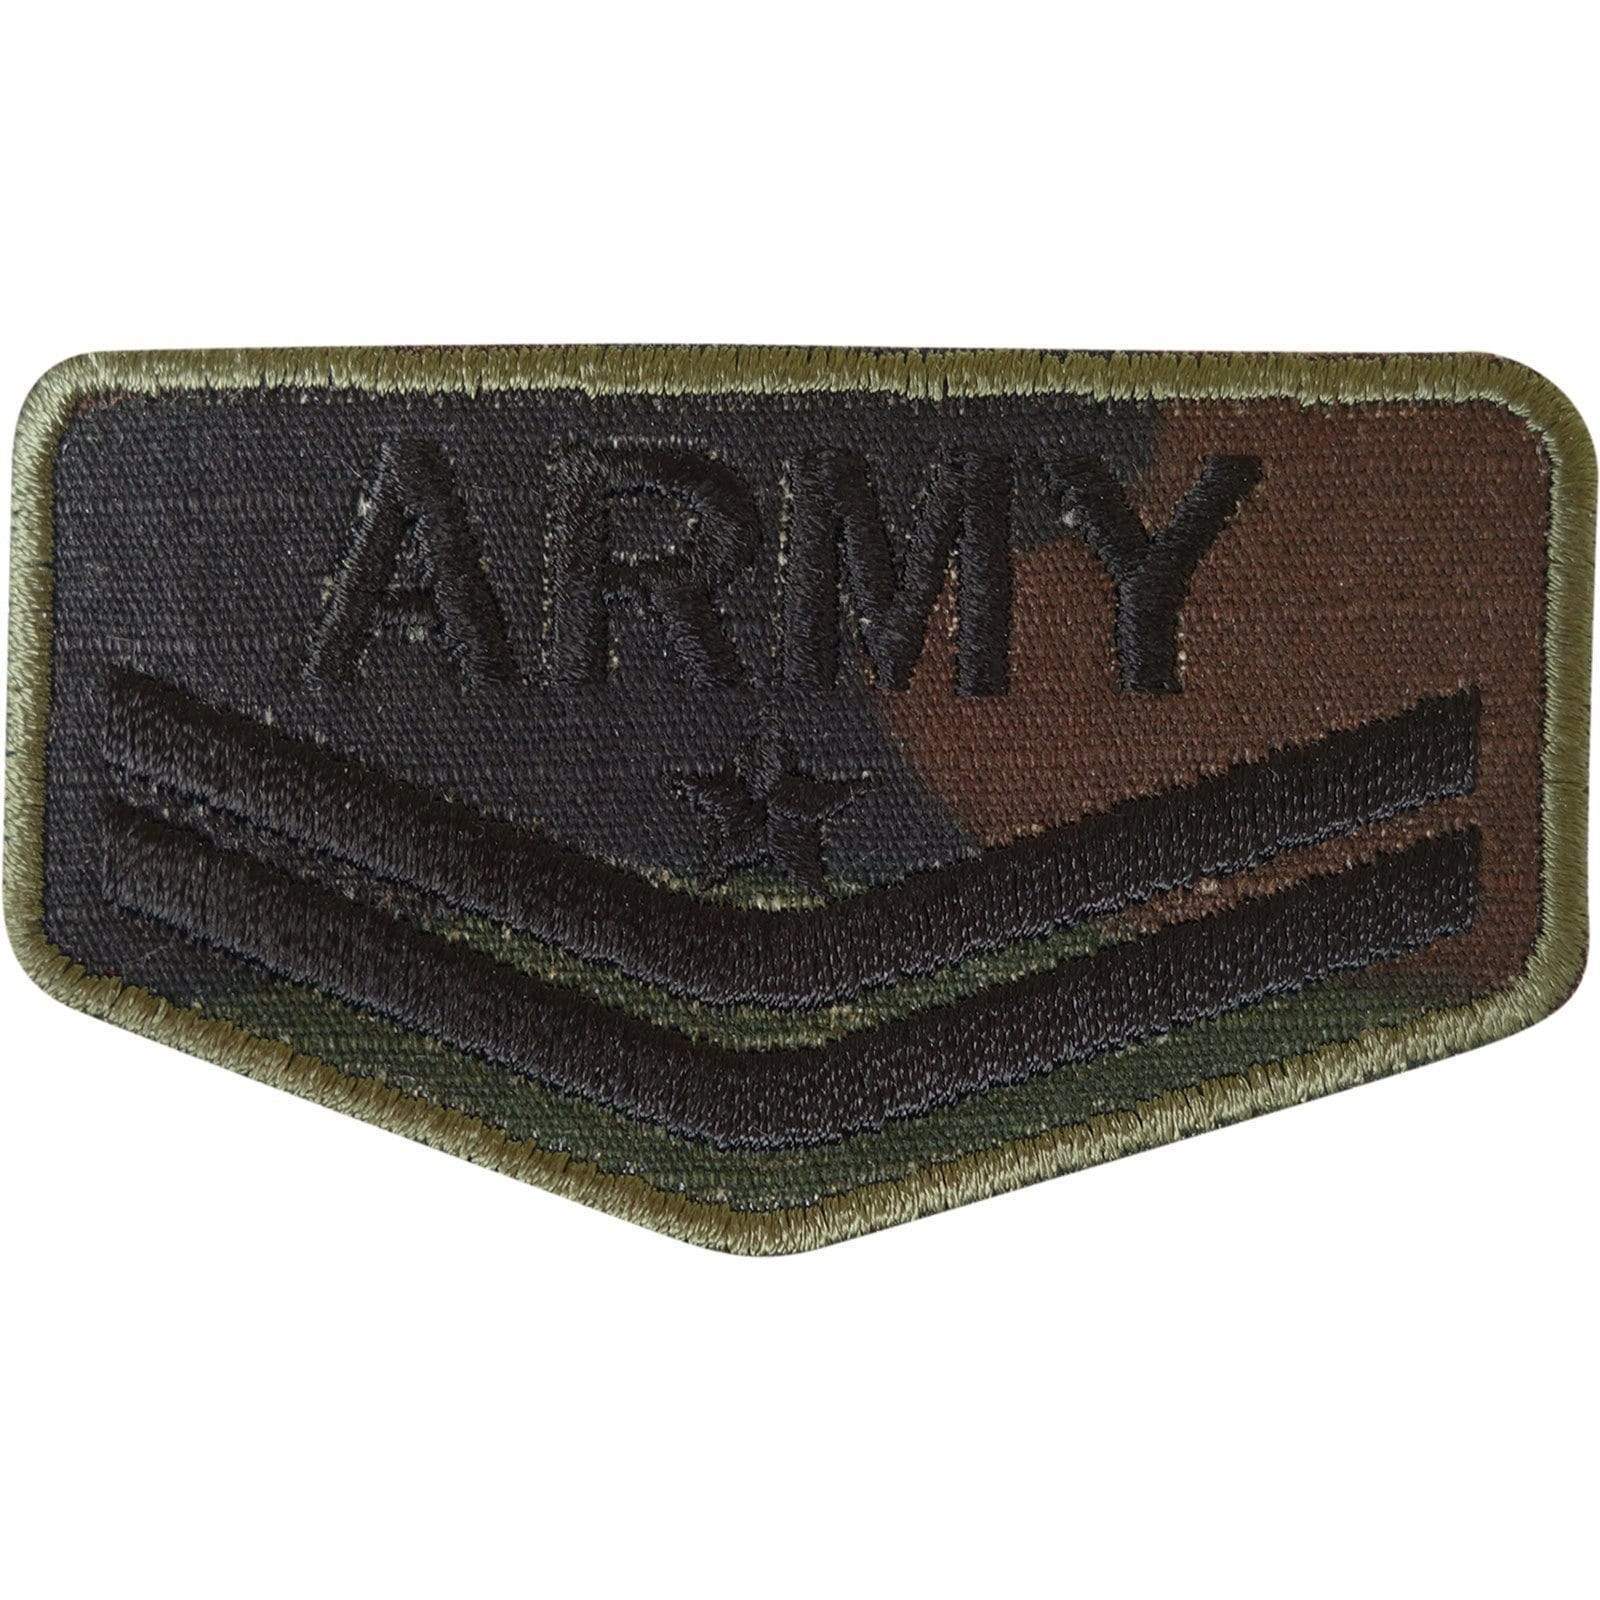 Army Uniform Patch Embroidered Badge Iron Sew On Soldier Bag Jumper Jacket Shirt